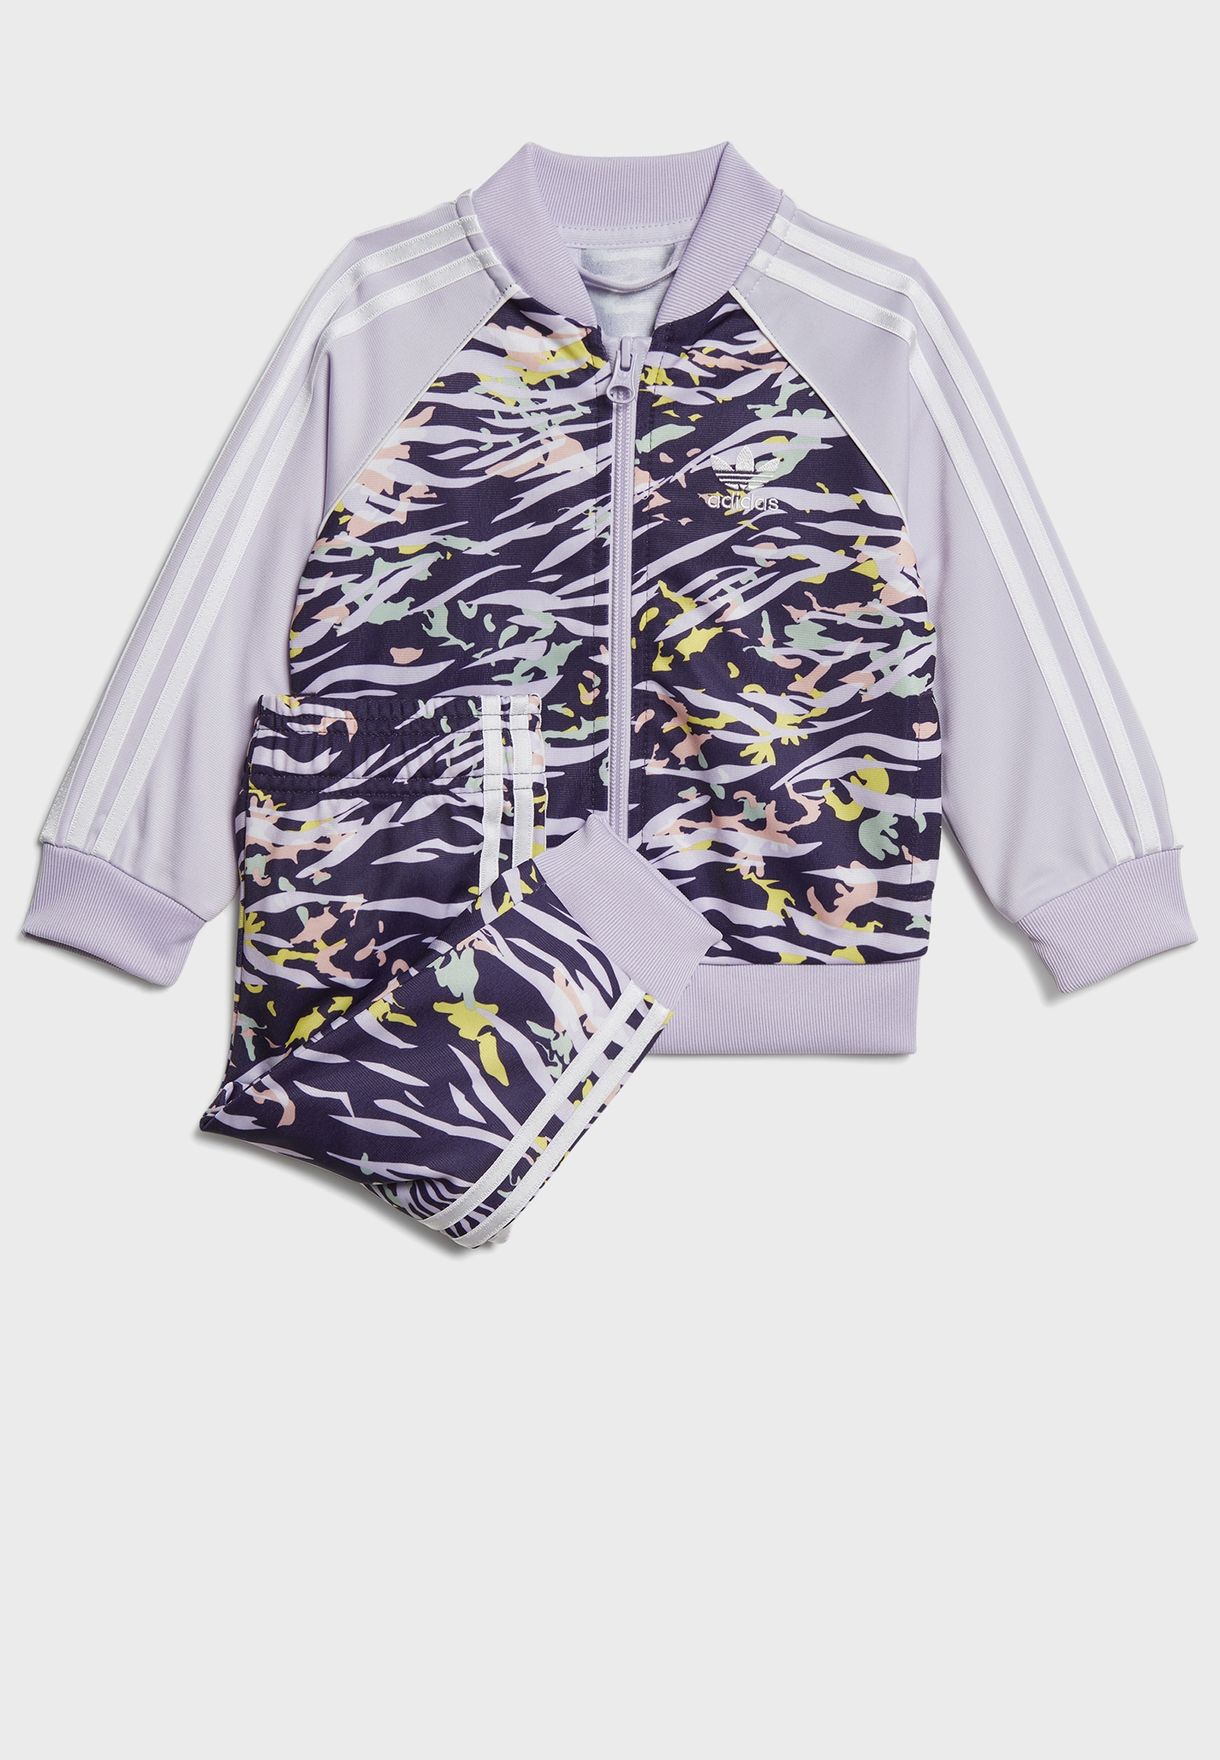 society family for example Buy adidas Originals prints Infant Superstar Tracksuit for Kids in Dubai,  Abu Dhabi